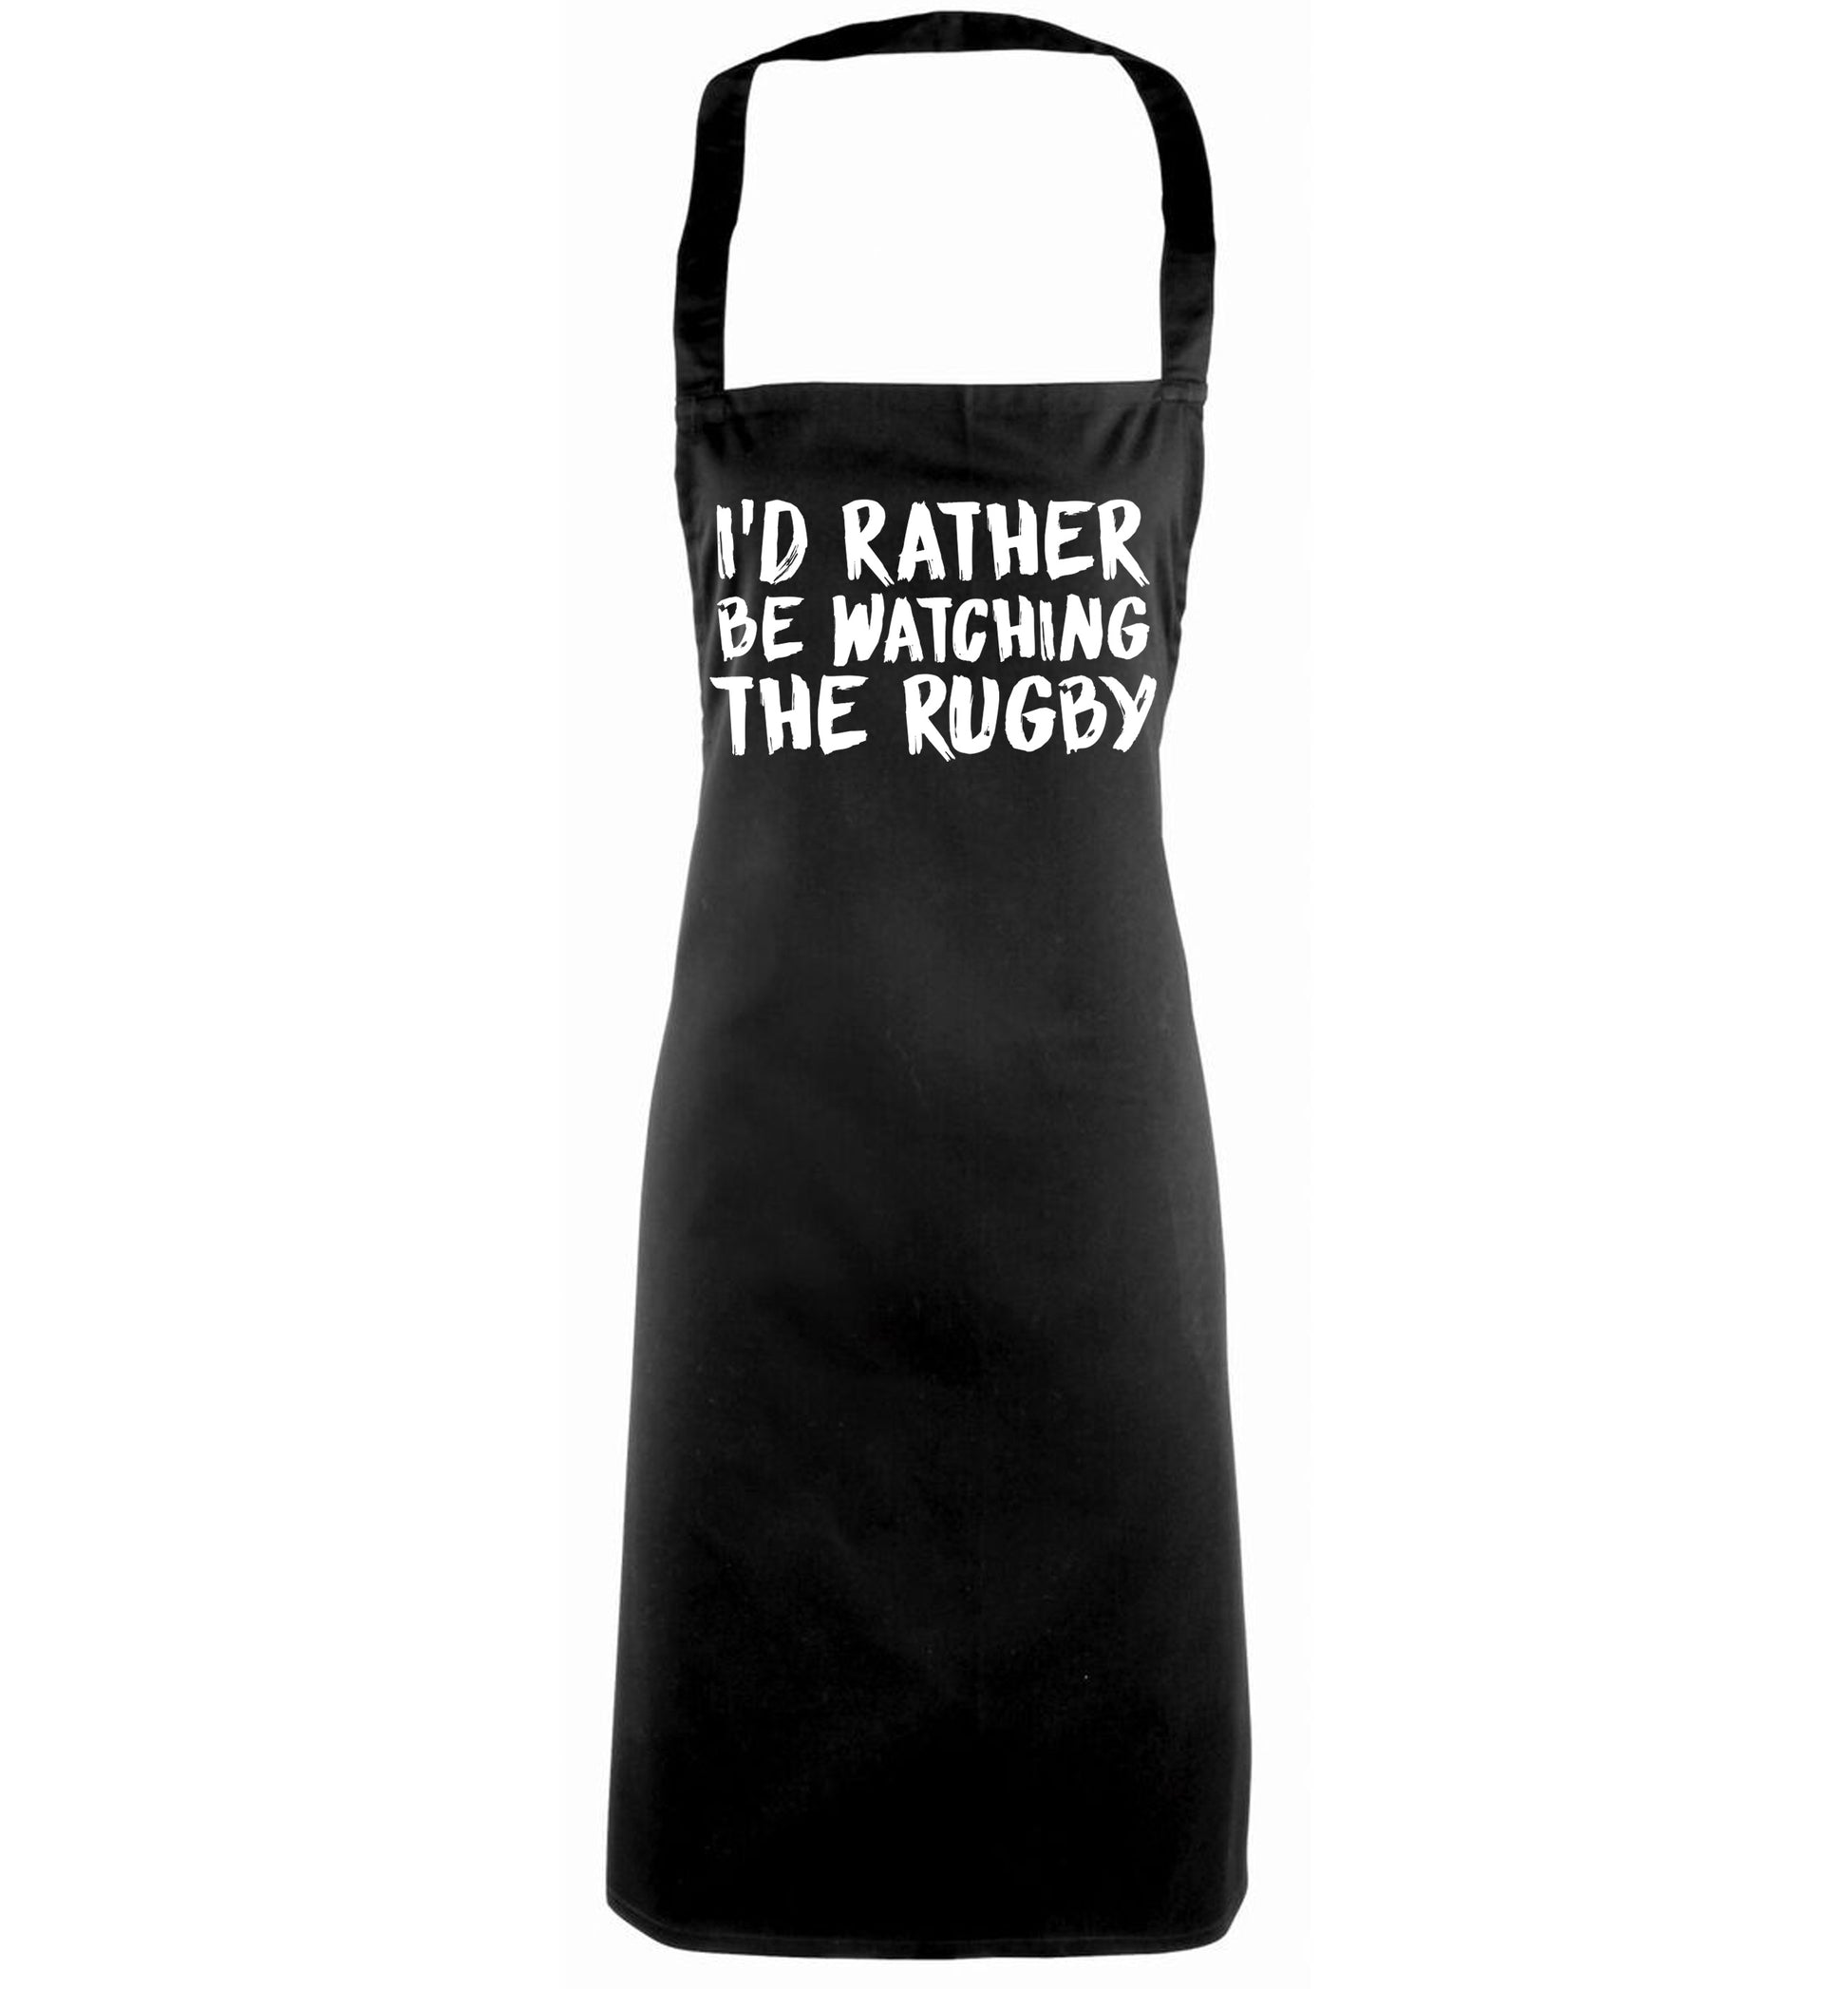 I'd rather be watching the rugby black apron